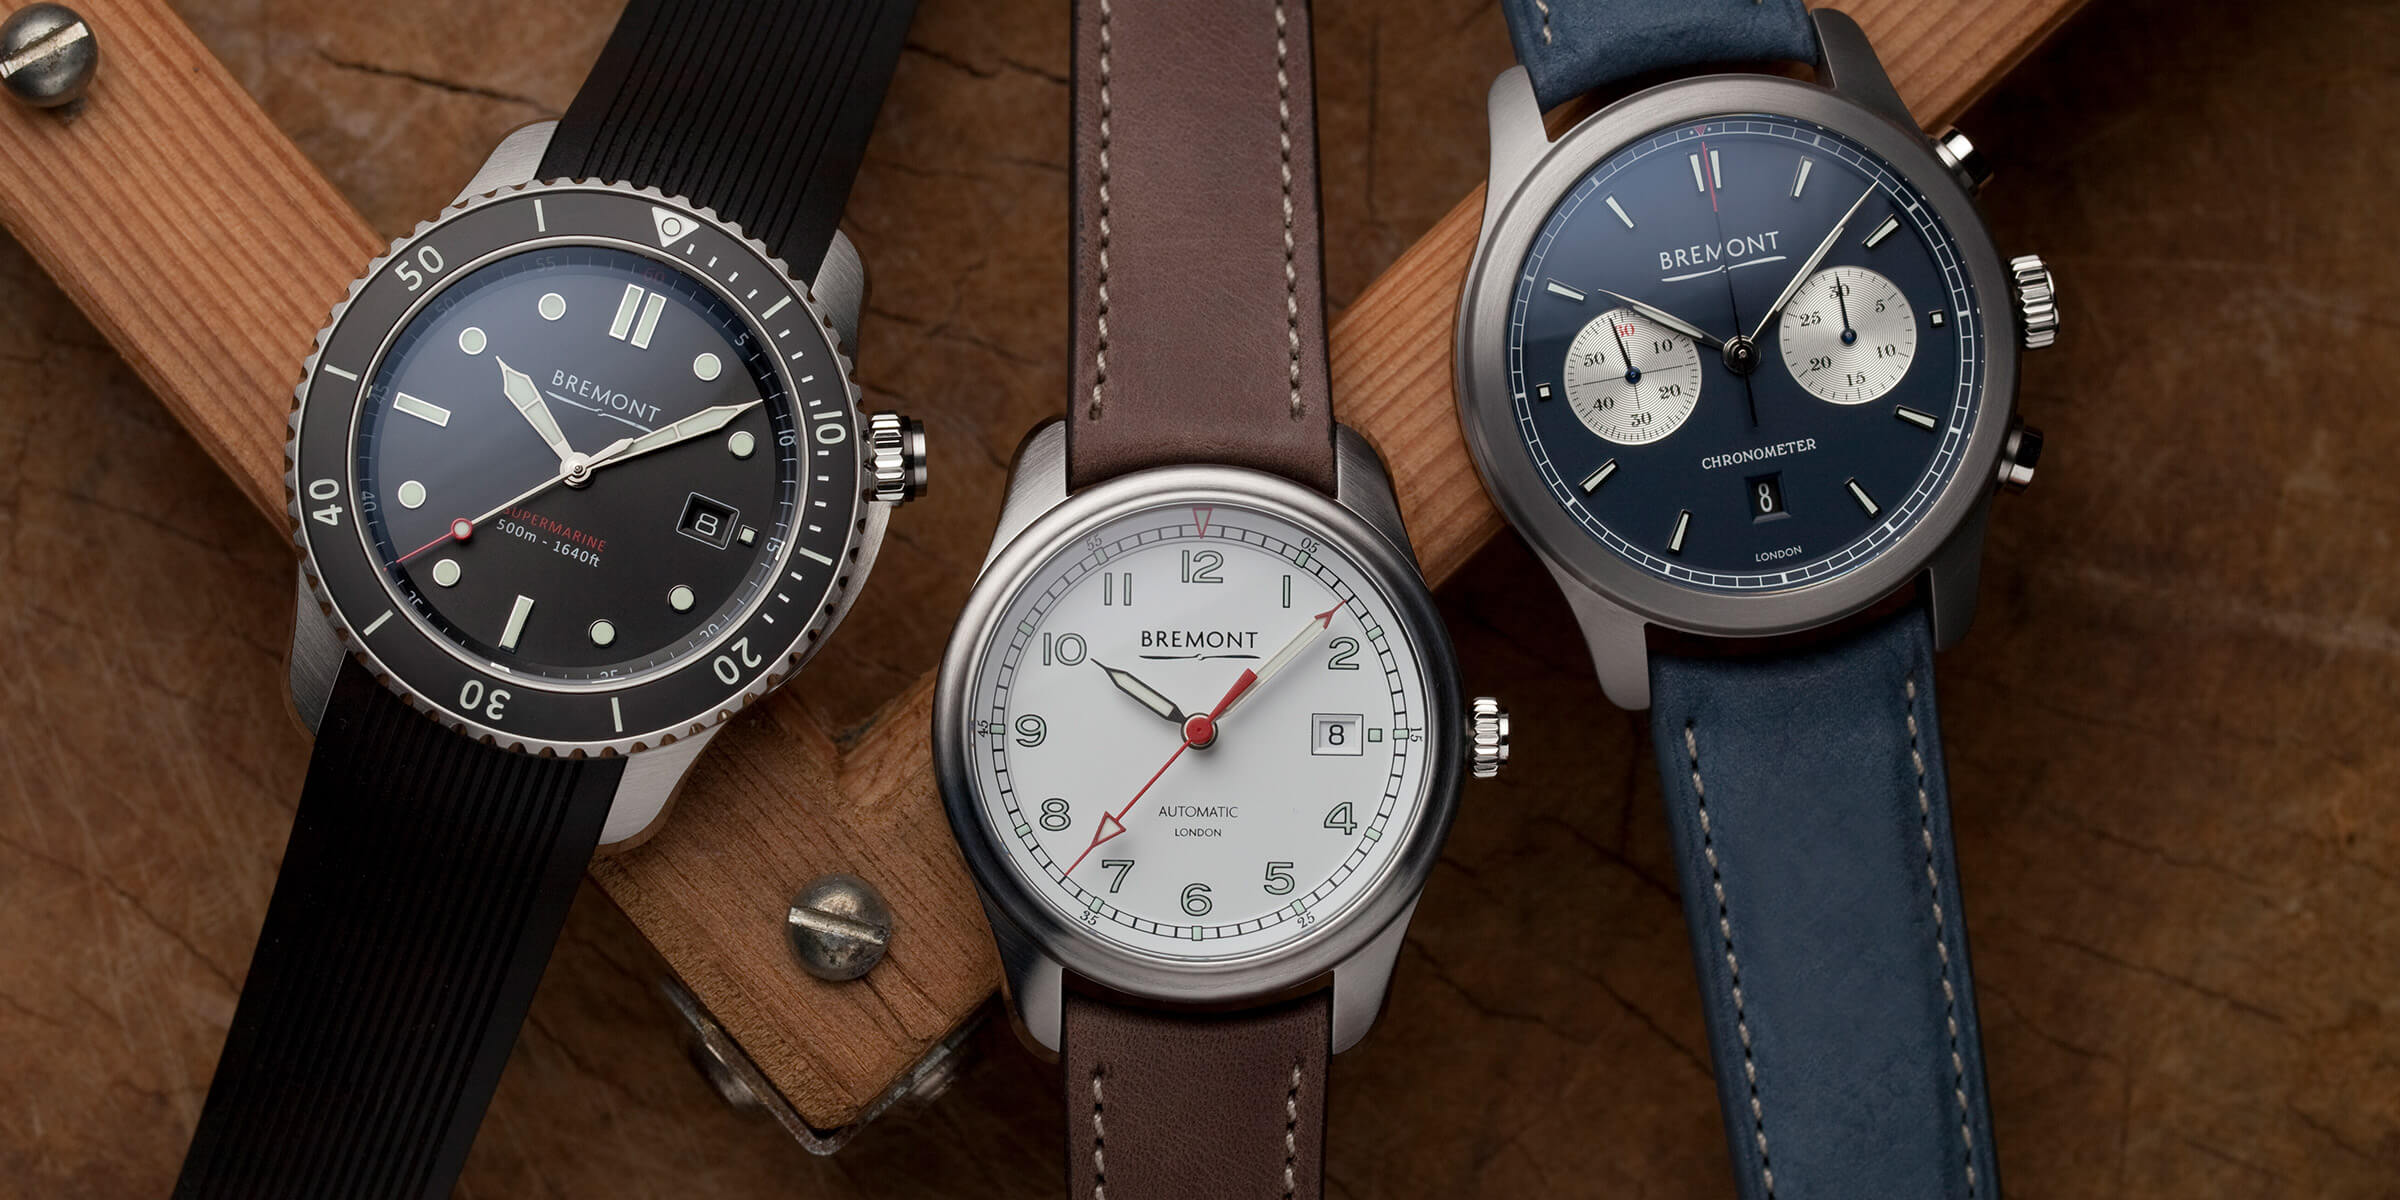 Bremont Watches: Good or Bad? - YouTube